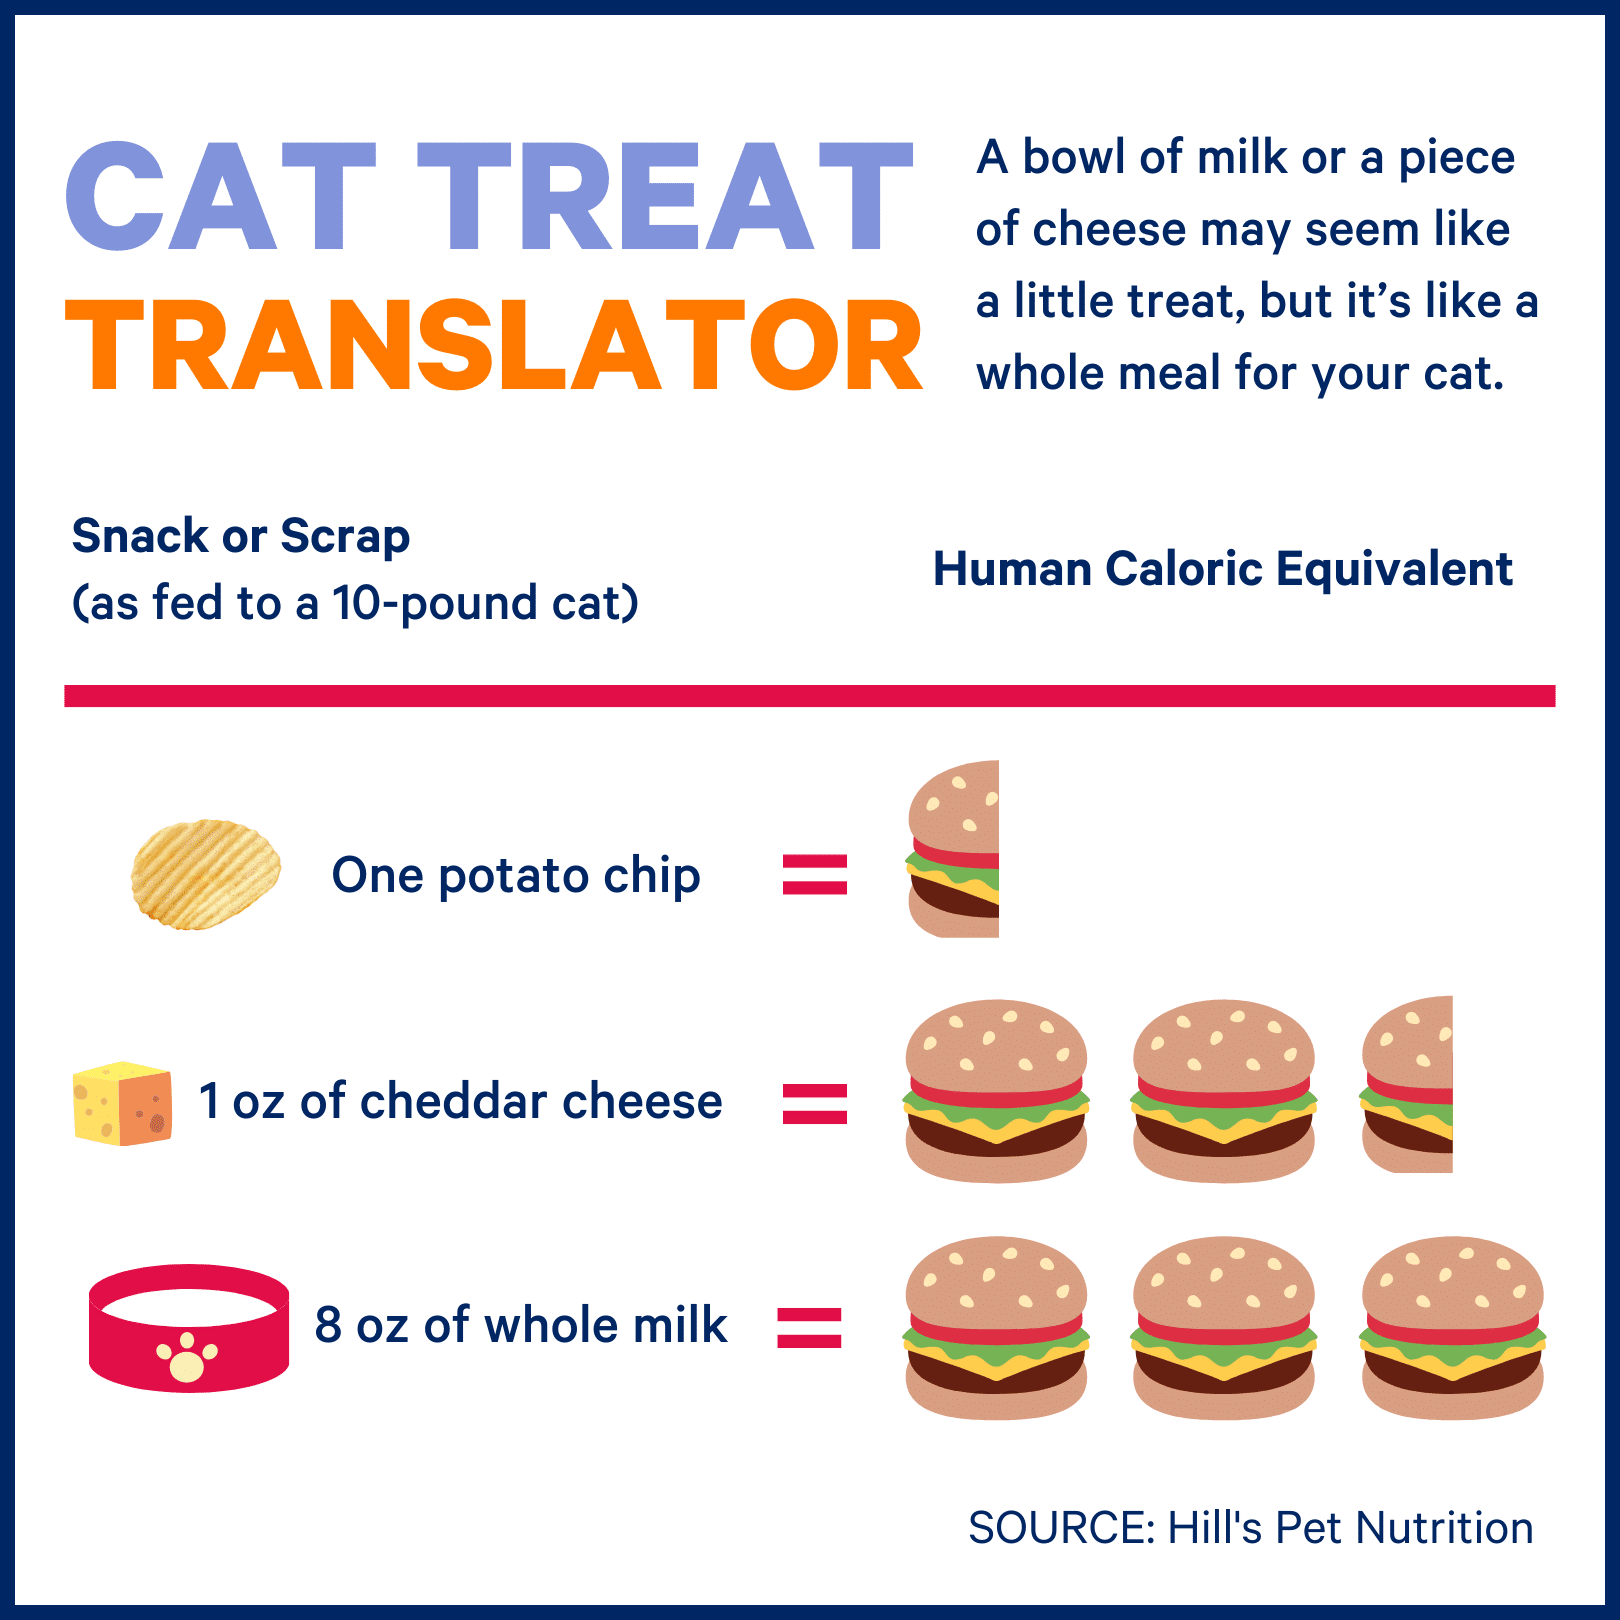 A bowl of milk or a piece of cheese may seem like a little treat, but it's like a whole meal for your cat. One potato chip for a 10-lb cat is like half of a hamburger for a human. One ounce of cheese for a 10-lb cat is like 3.5 hamburgers for a human. one 8 oz bowl of milk is like 3 hamburgers for a human. Souce: Hill's Pet nutrition.